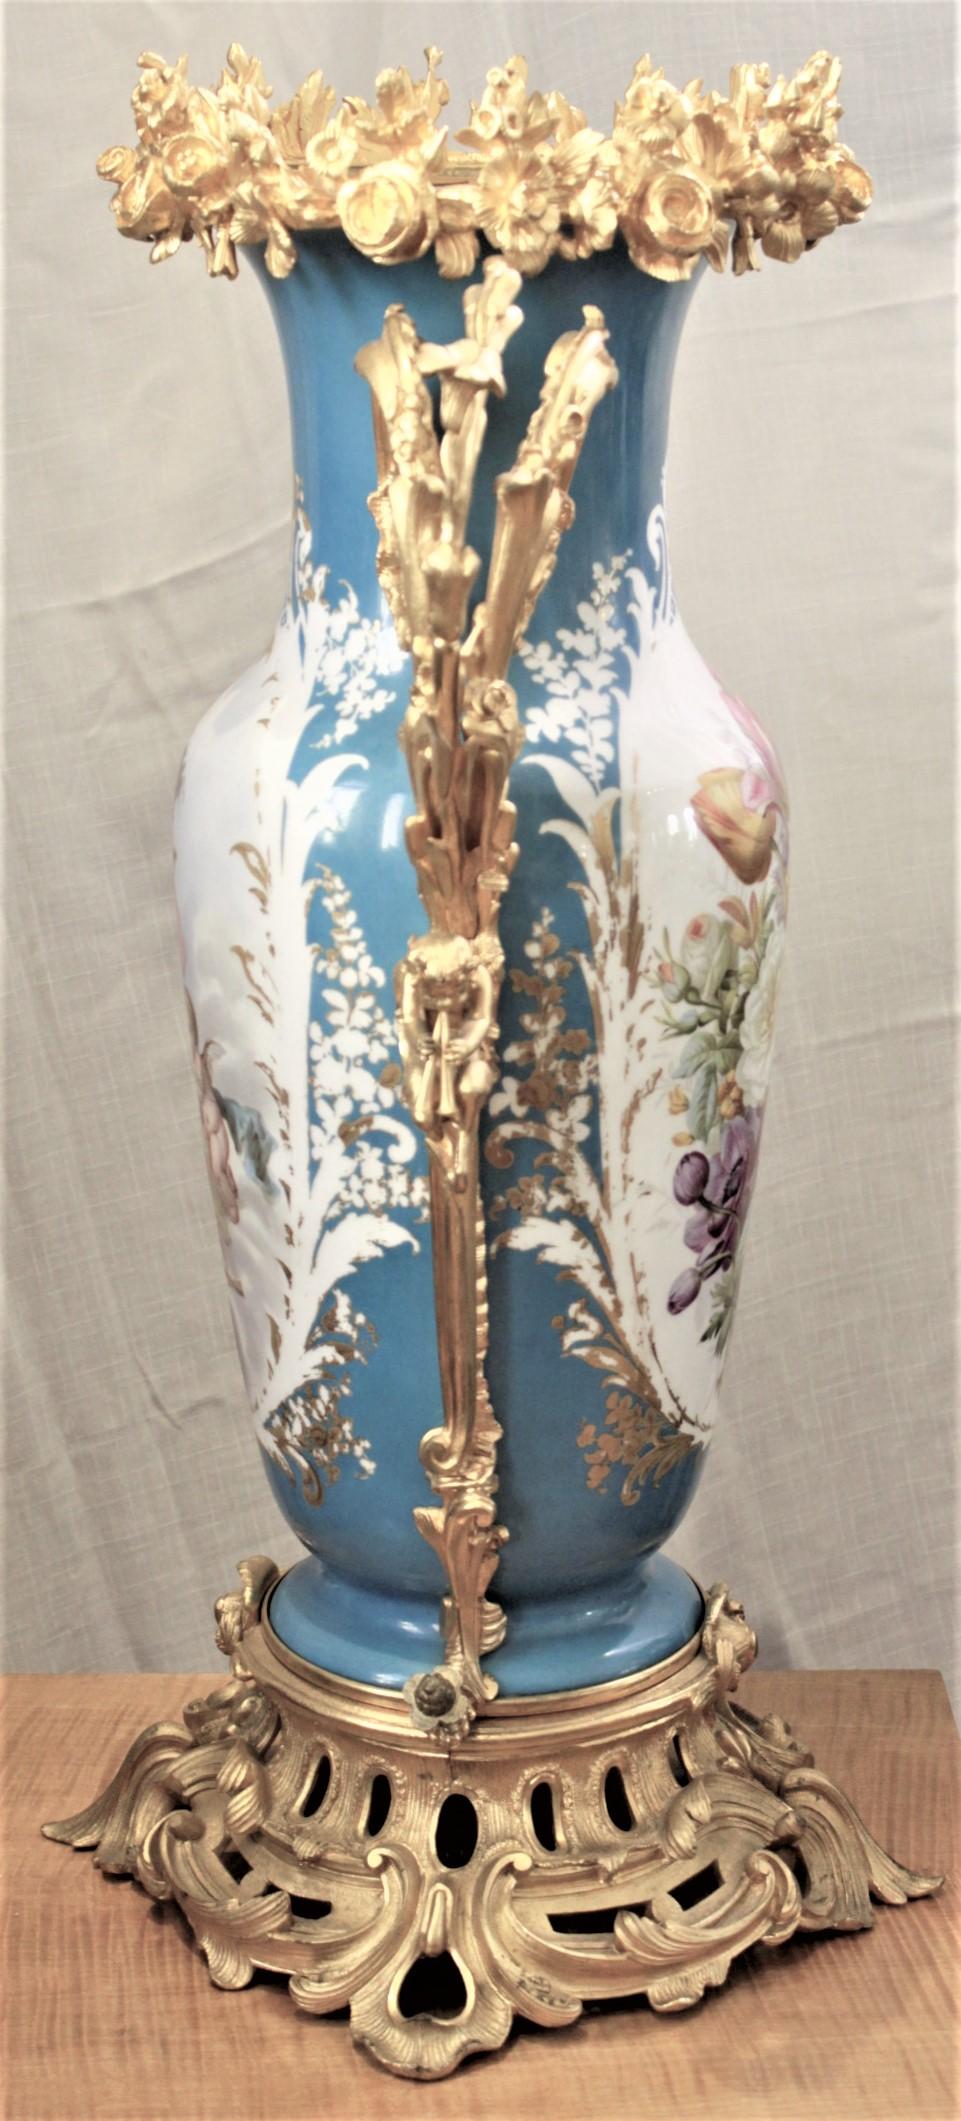 French Large Antique Sevres Styled Hand-Painted Porcelain Vase with Gilt Bronze Mounts For Sale